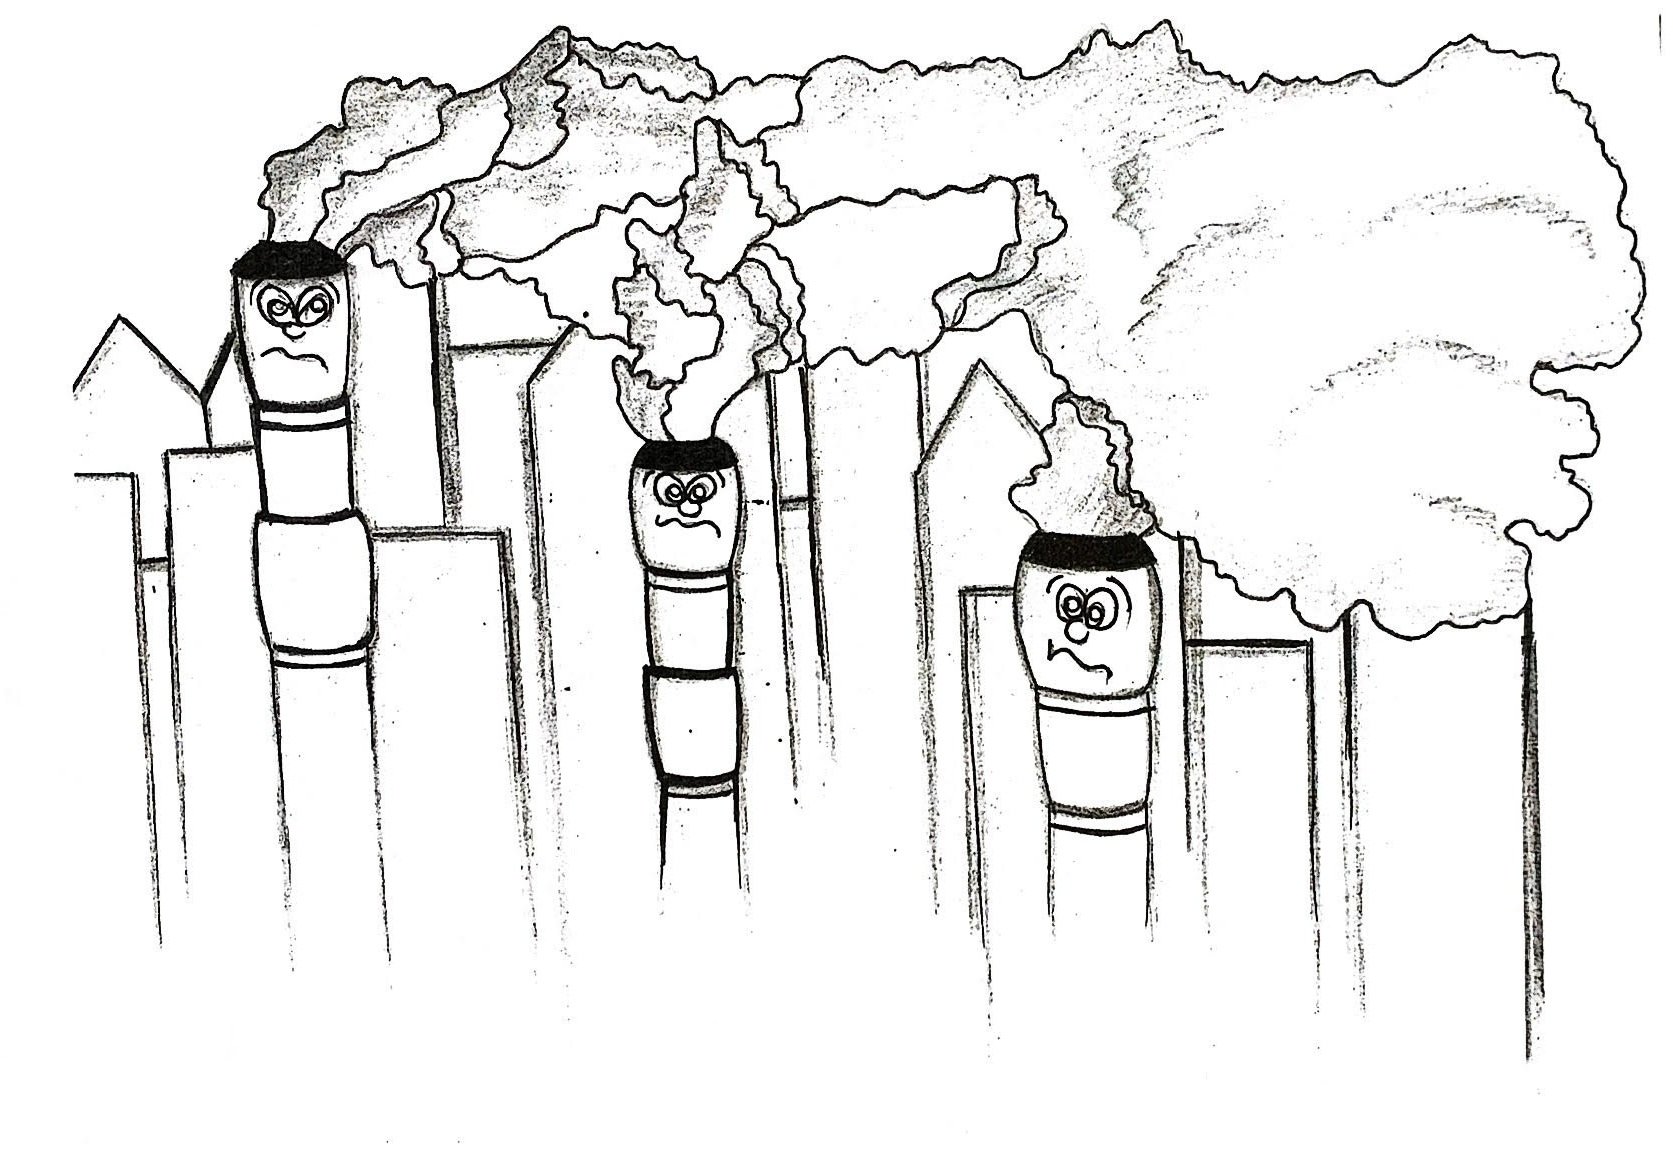 Illustration - Sad faced factory towers blowing out pollution